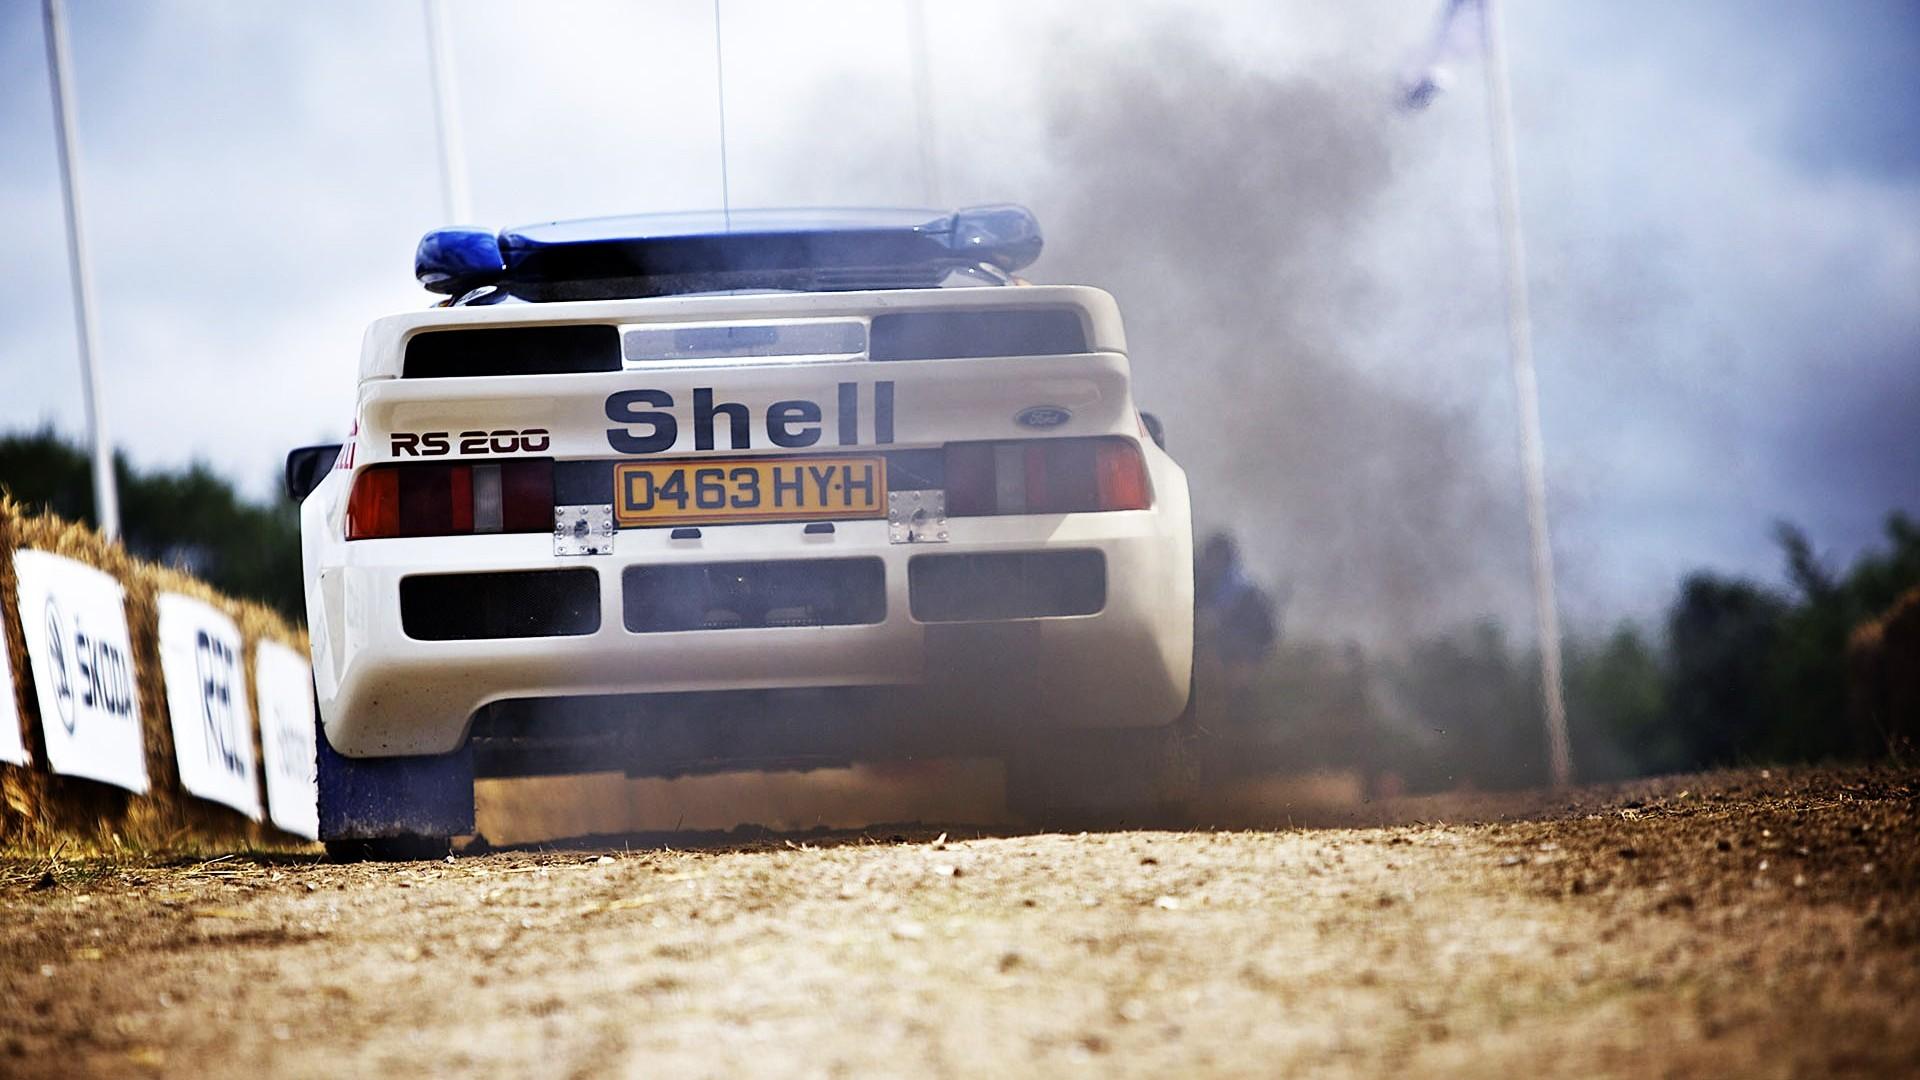 Ford RS200 Wallpaper High Resolution and Quality Download